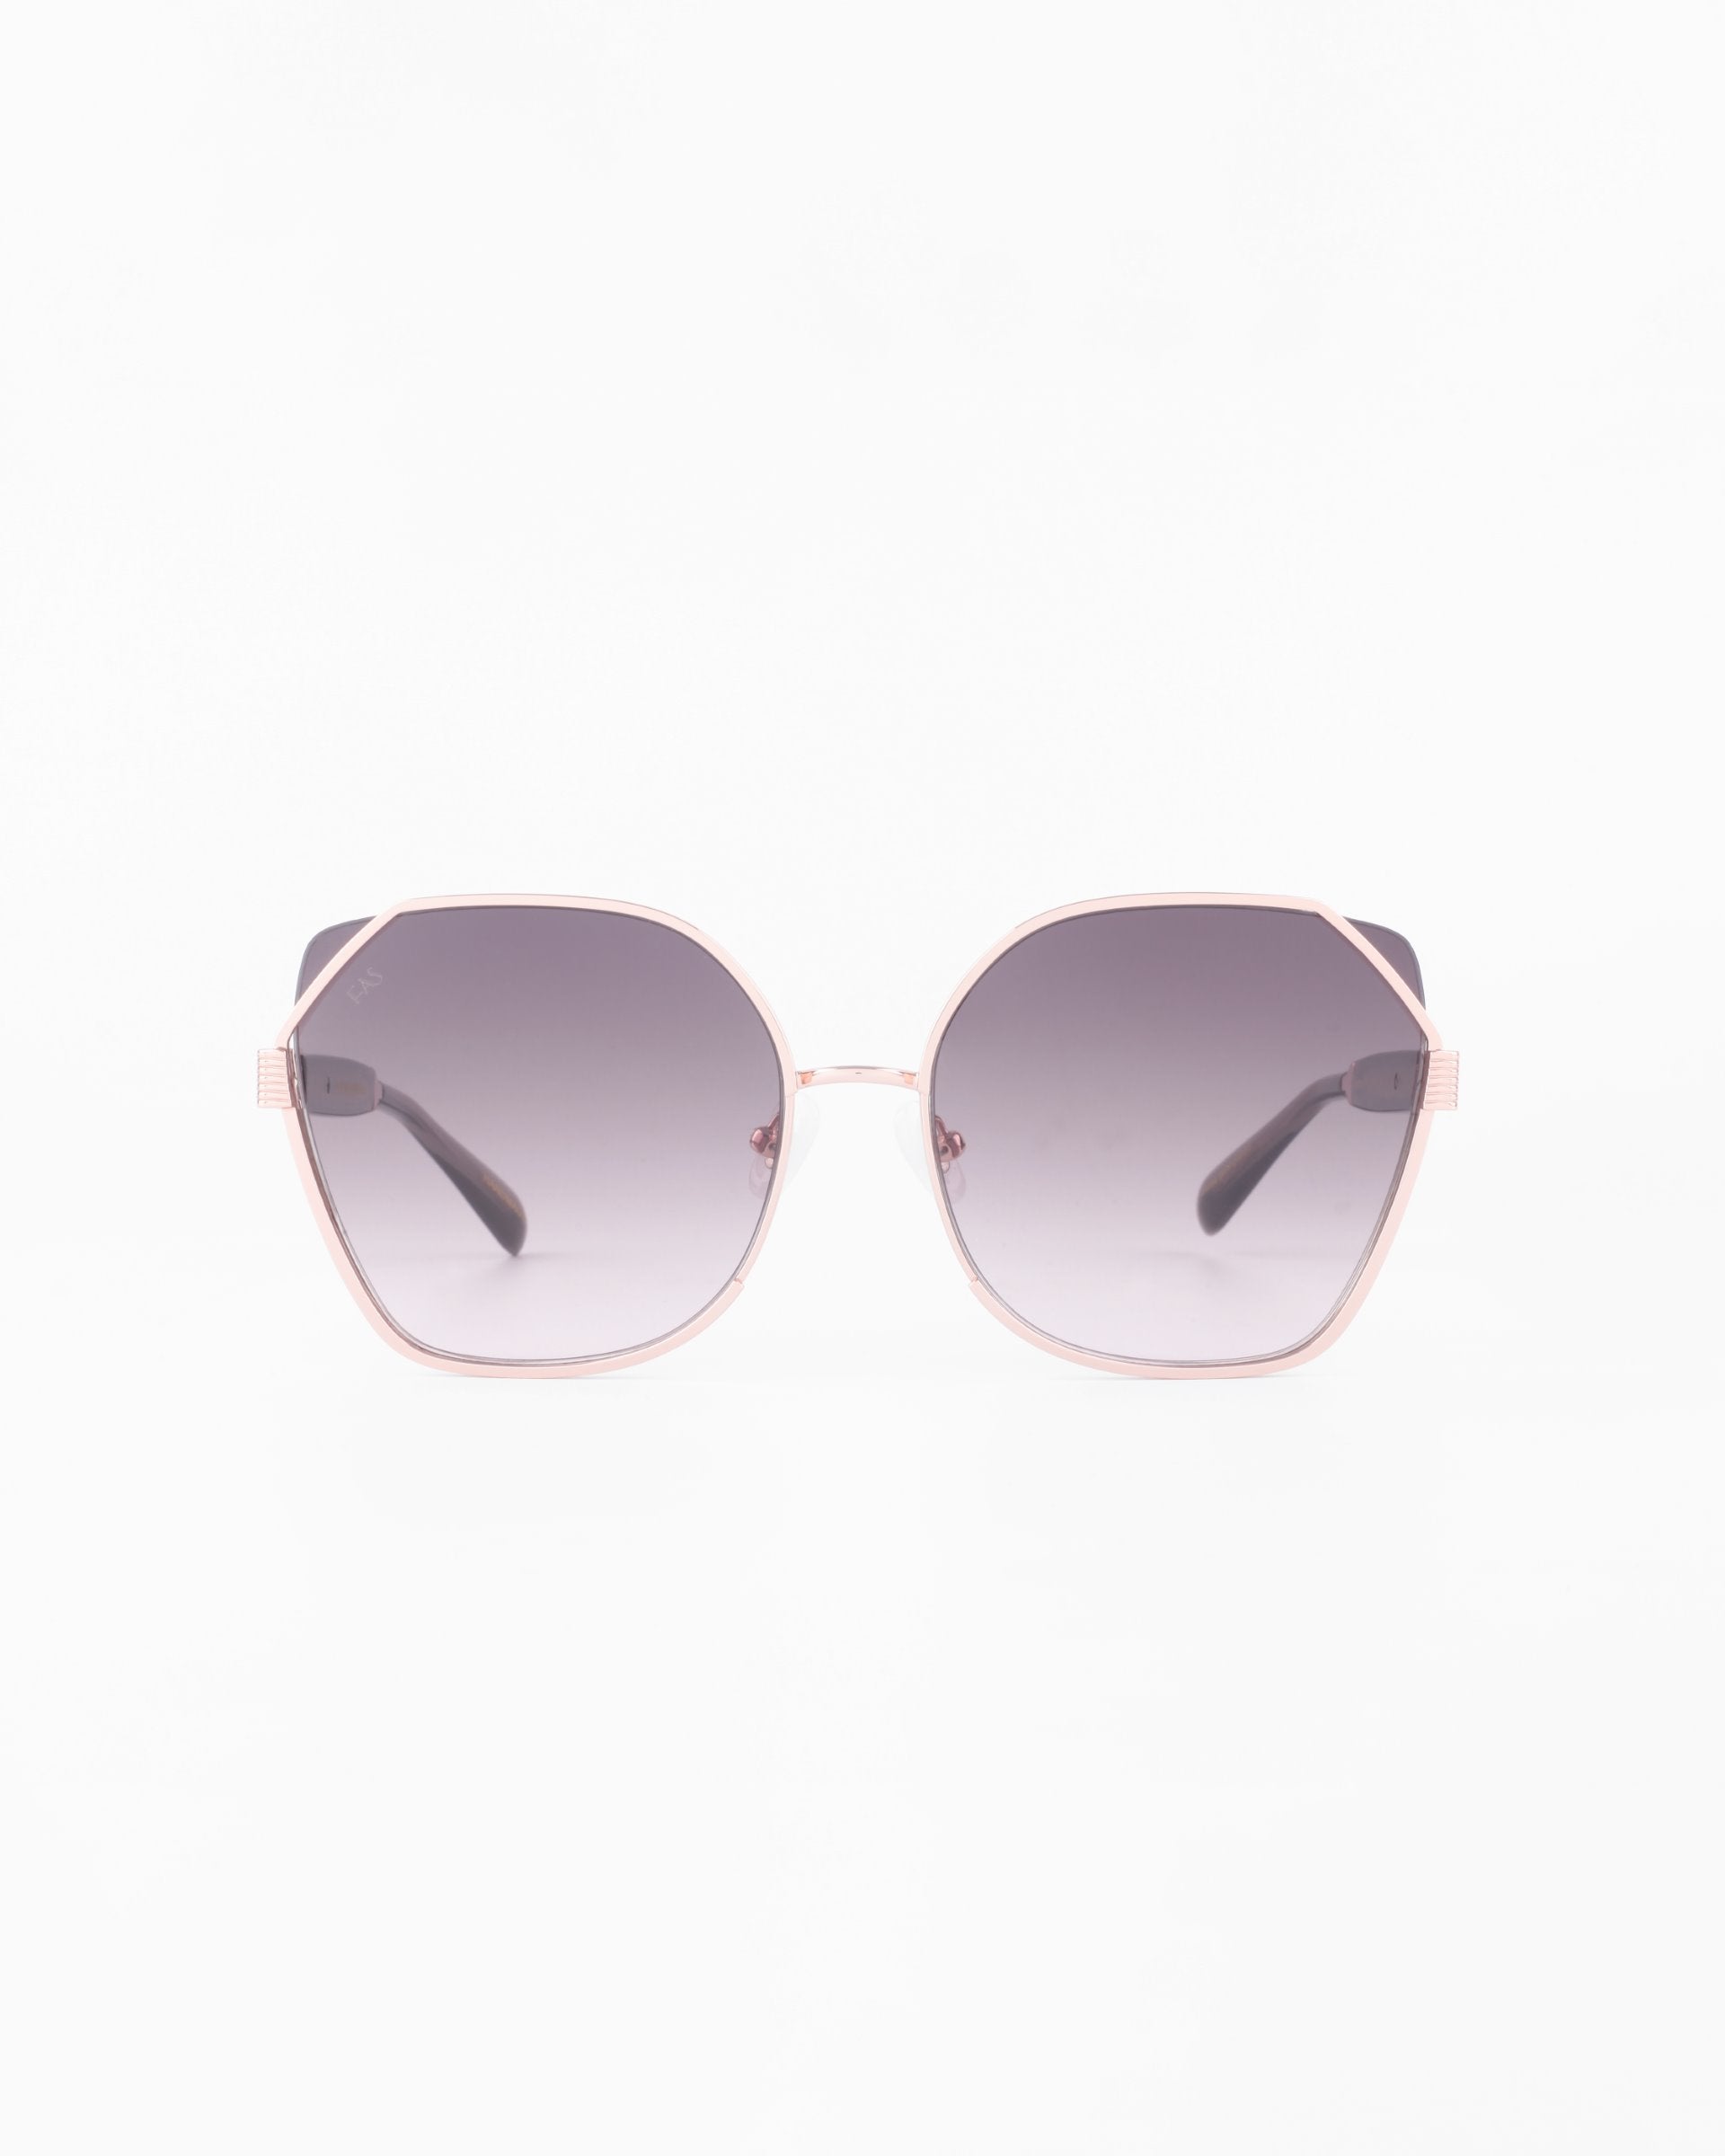 A pair of Montage sunglasses with large, round lenses and a thin, gold-plated stainless steel frame by For Art&#39;s Sake®. The gradient-tinted lenses offer 100% UVA &amp; UVB protection, transitioning from a darker shade at the top to a lighter shade at the bottom. The arms are slender and black.